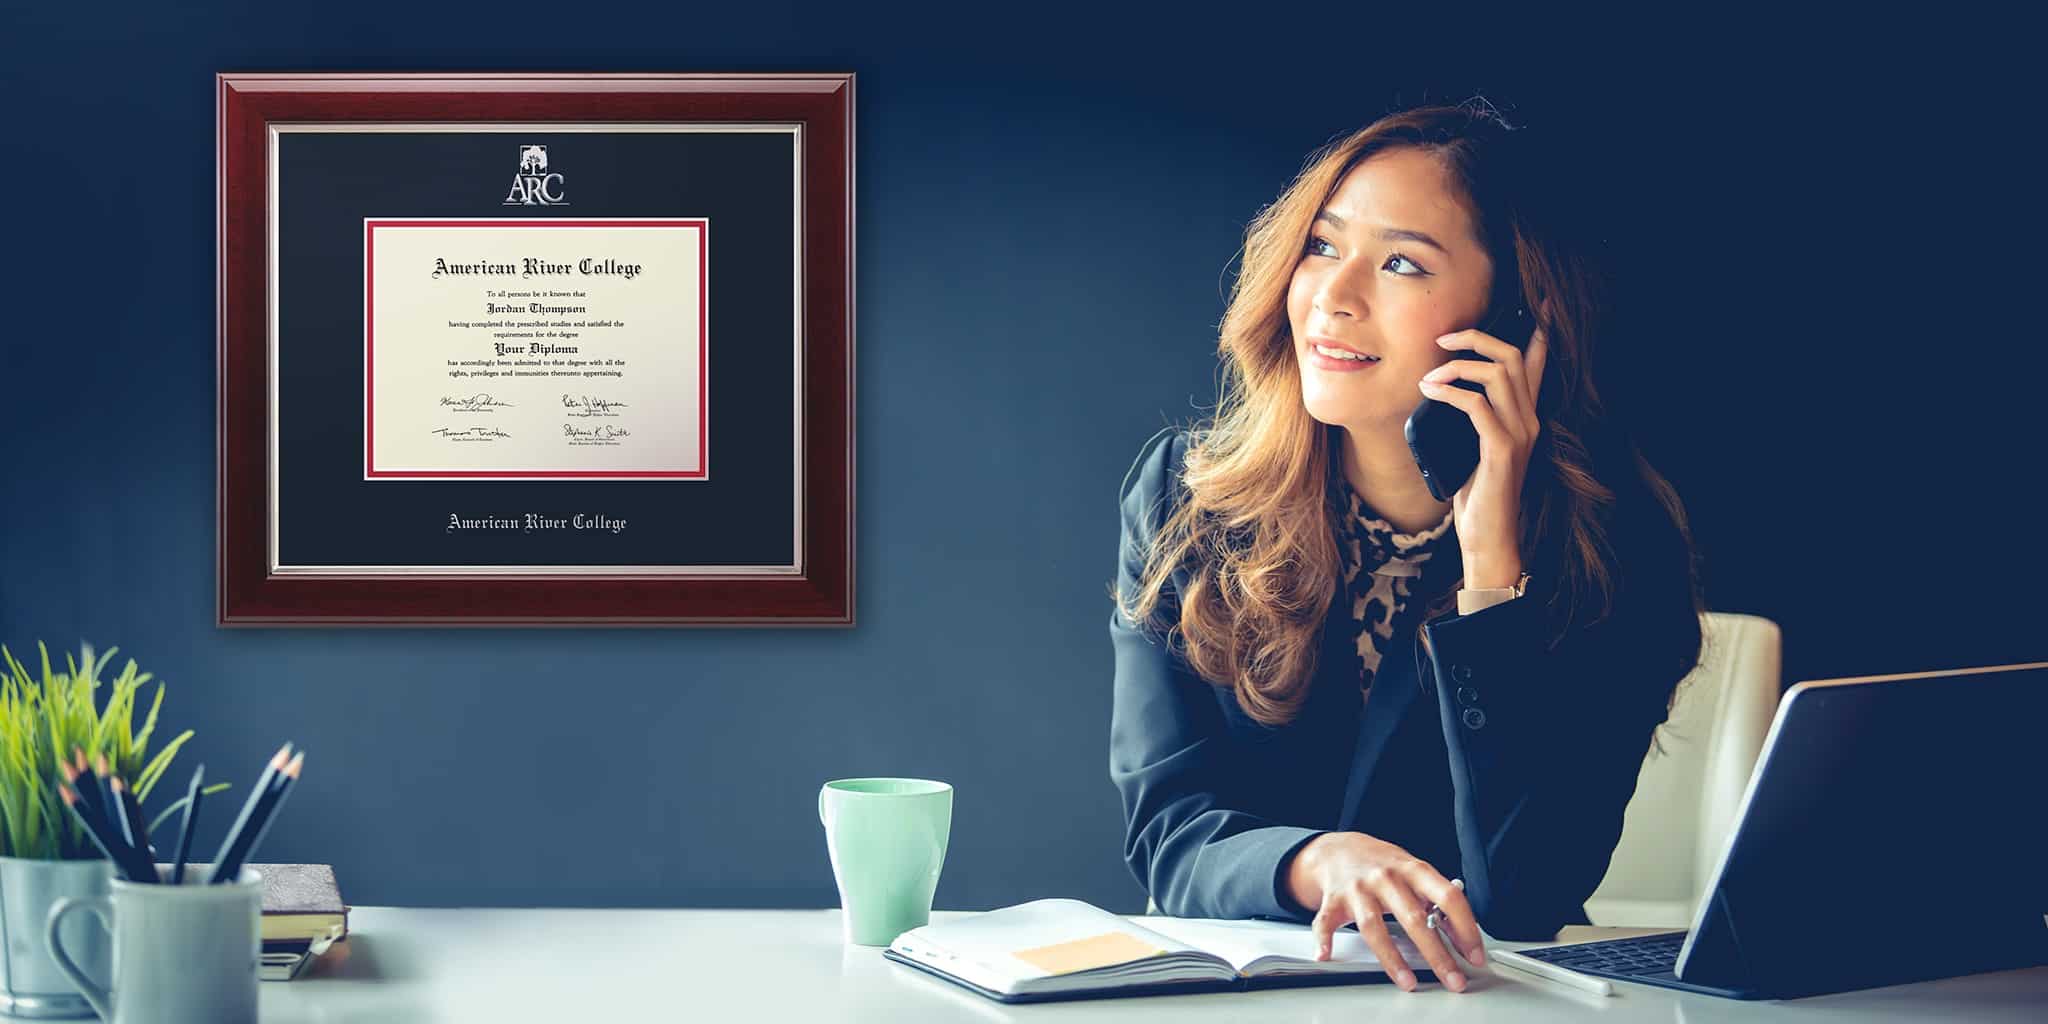 woman in office with American River College frame on wall